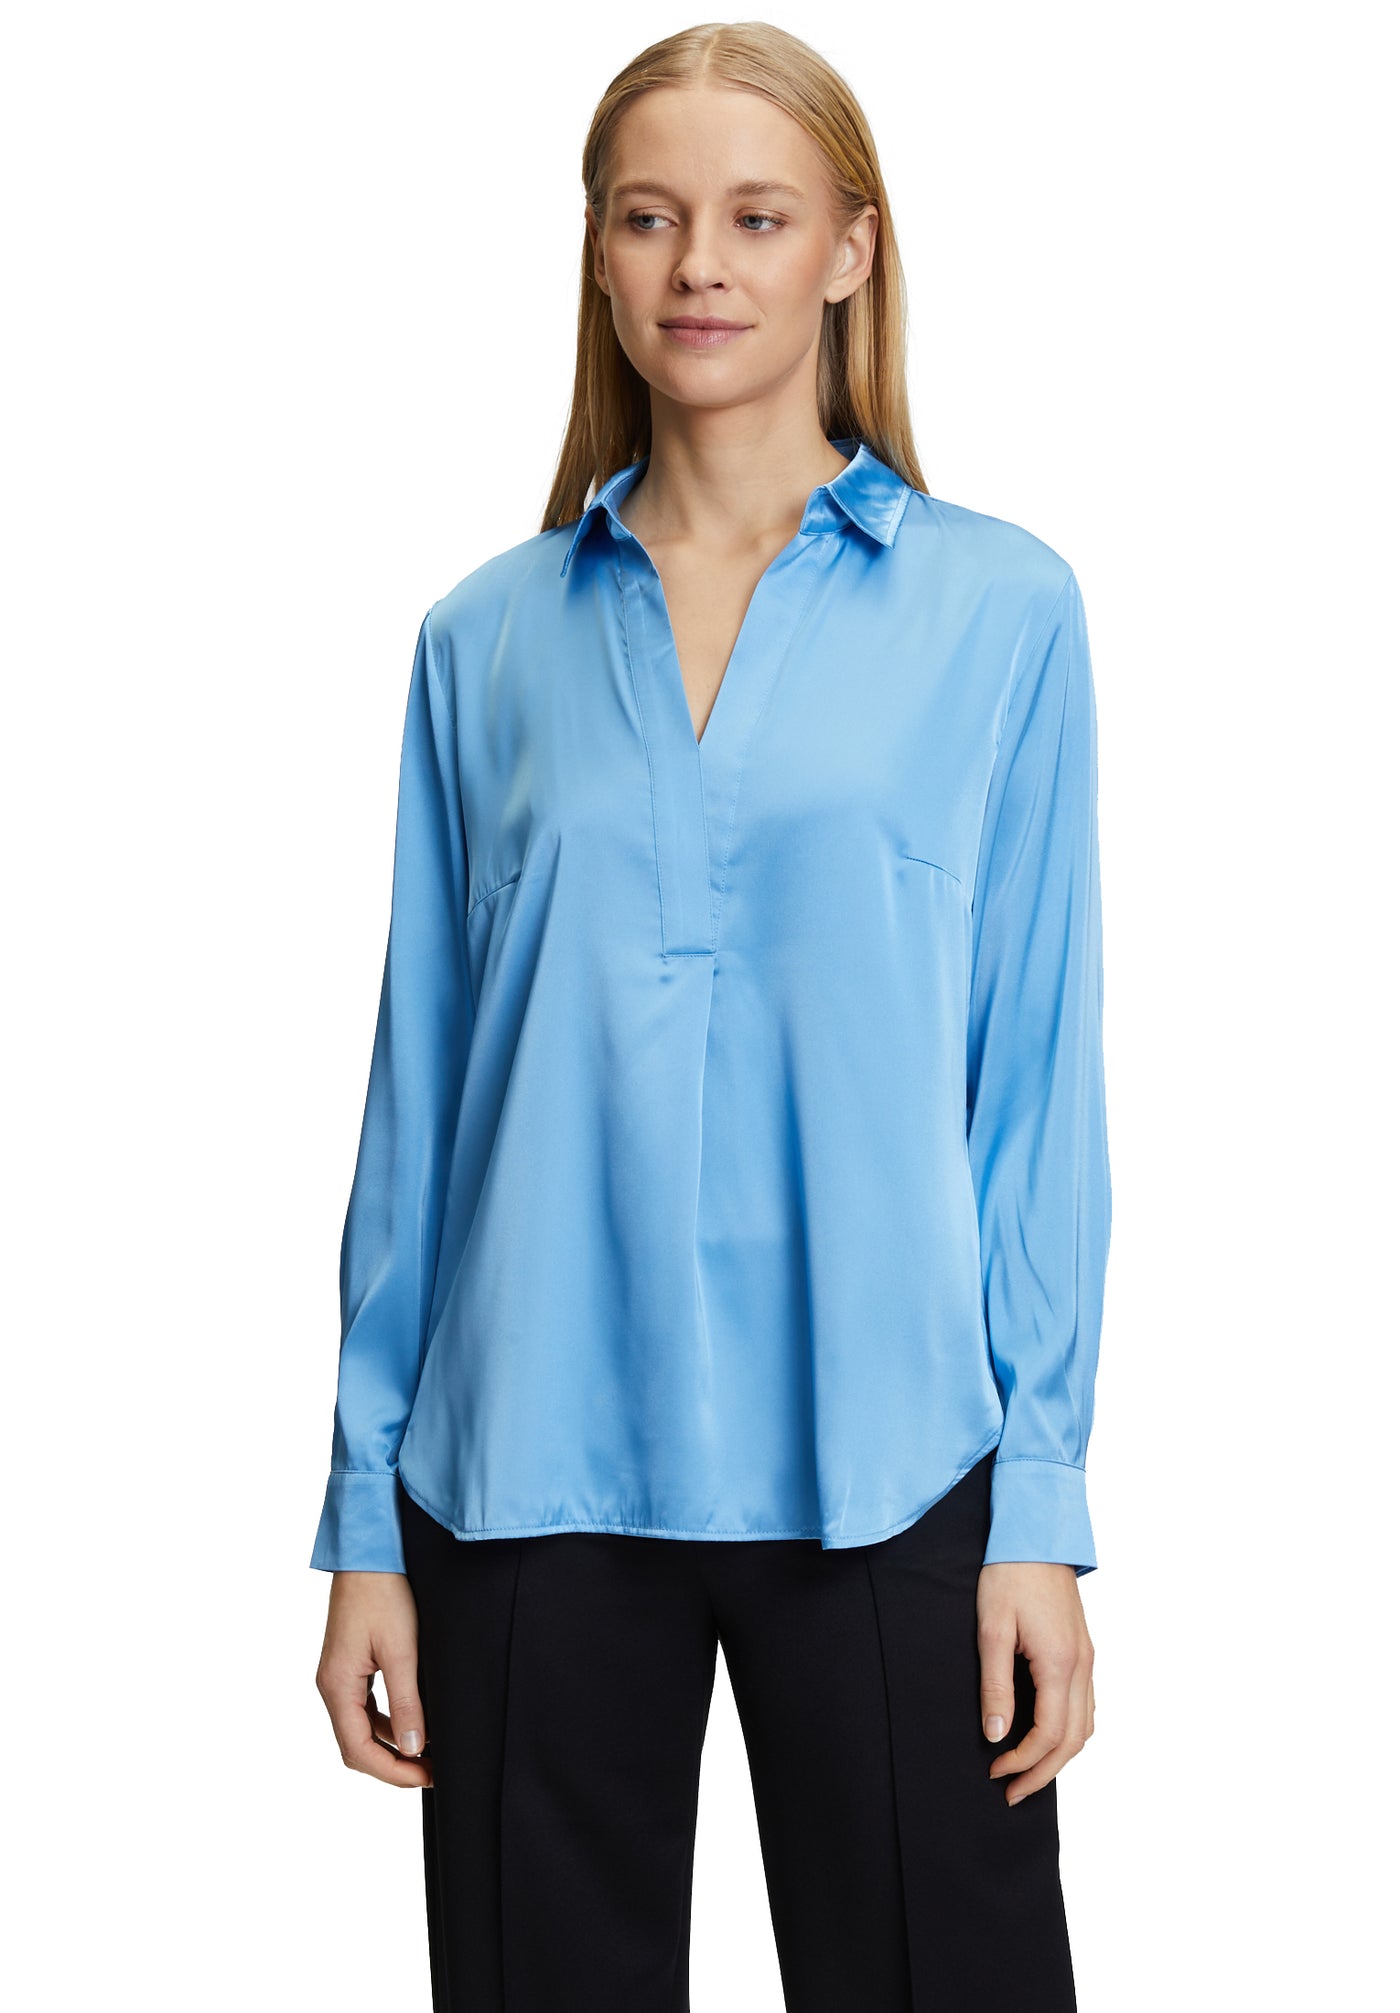 Azure Blue Top with Shirt Collar and V-Neck